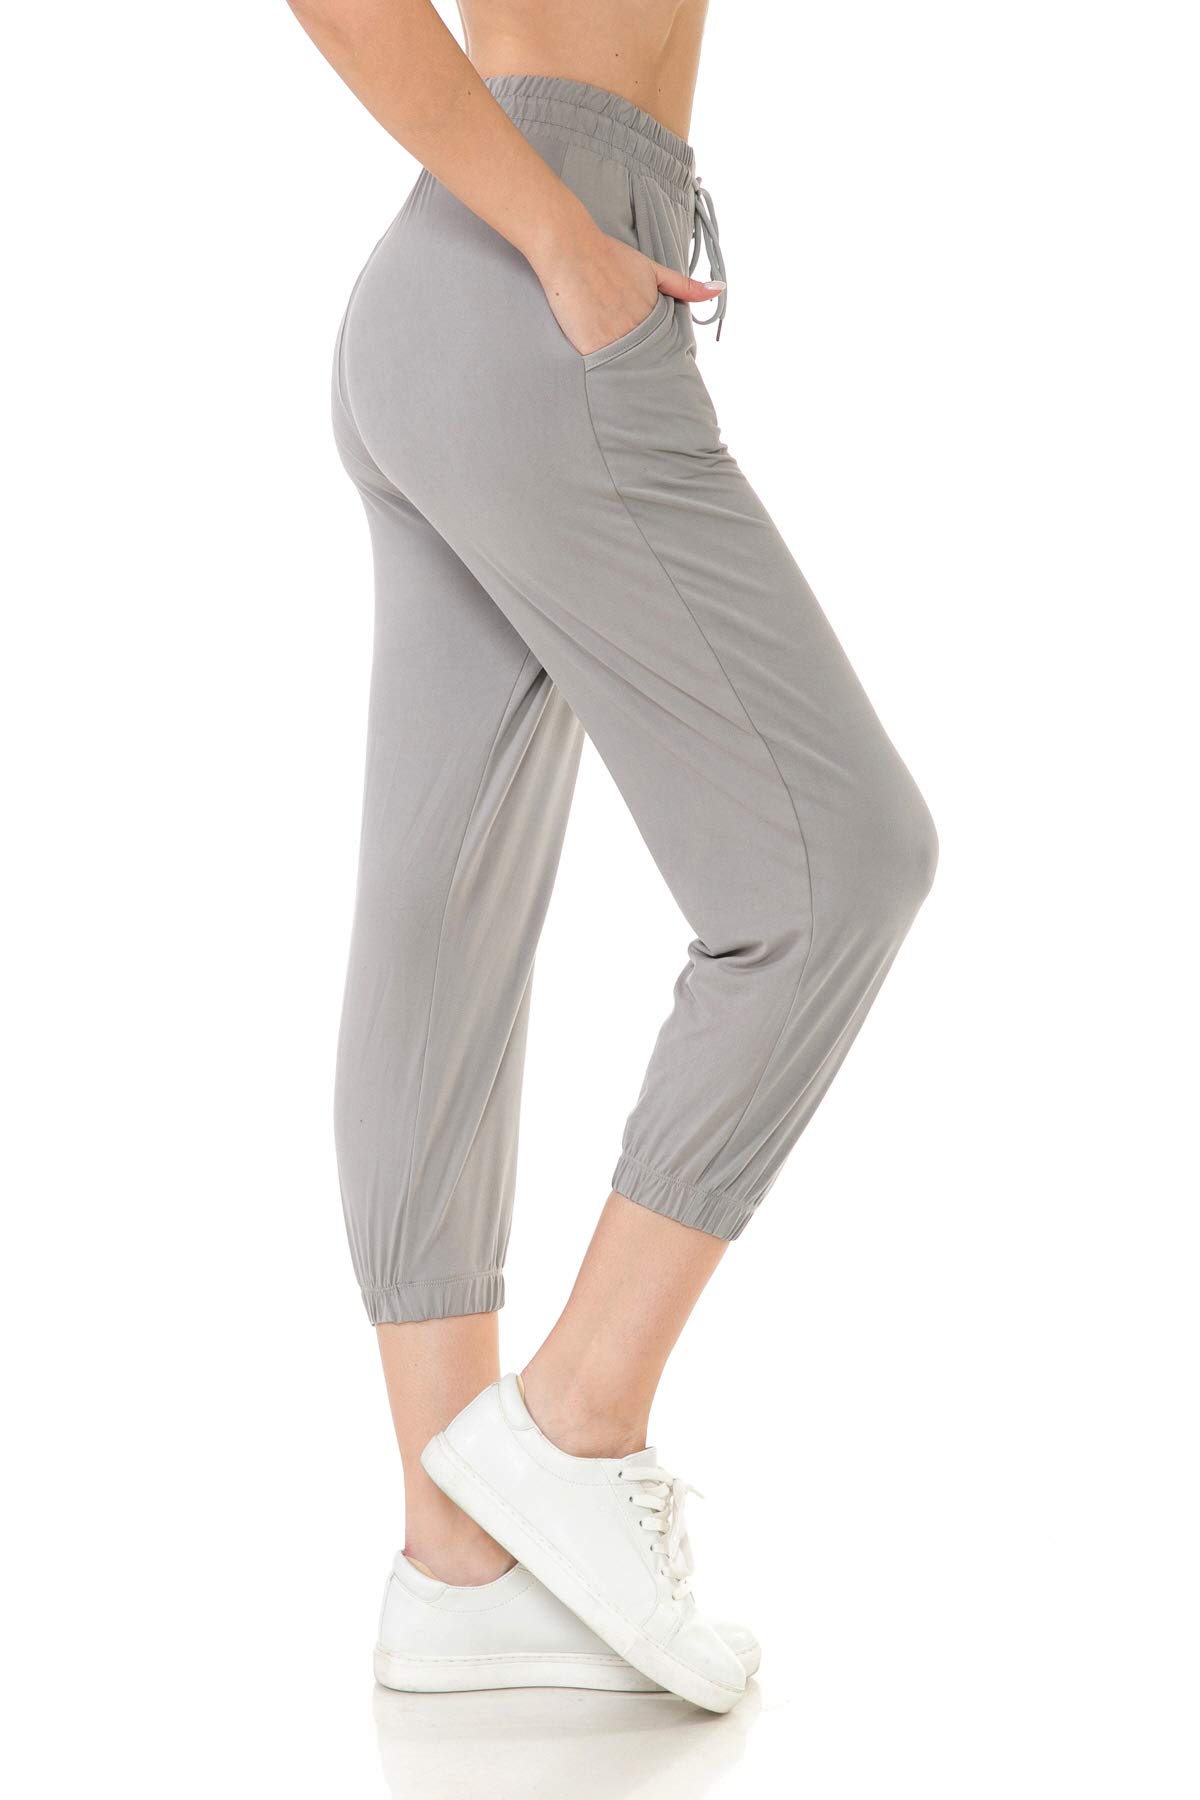 Buy Leggings Depot Women's Relaxed-fit Jogger Track Cuff Sweatpants with  Pockets for Yoga, Workout